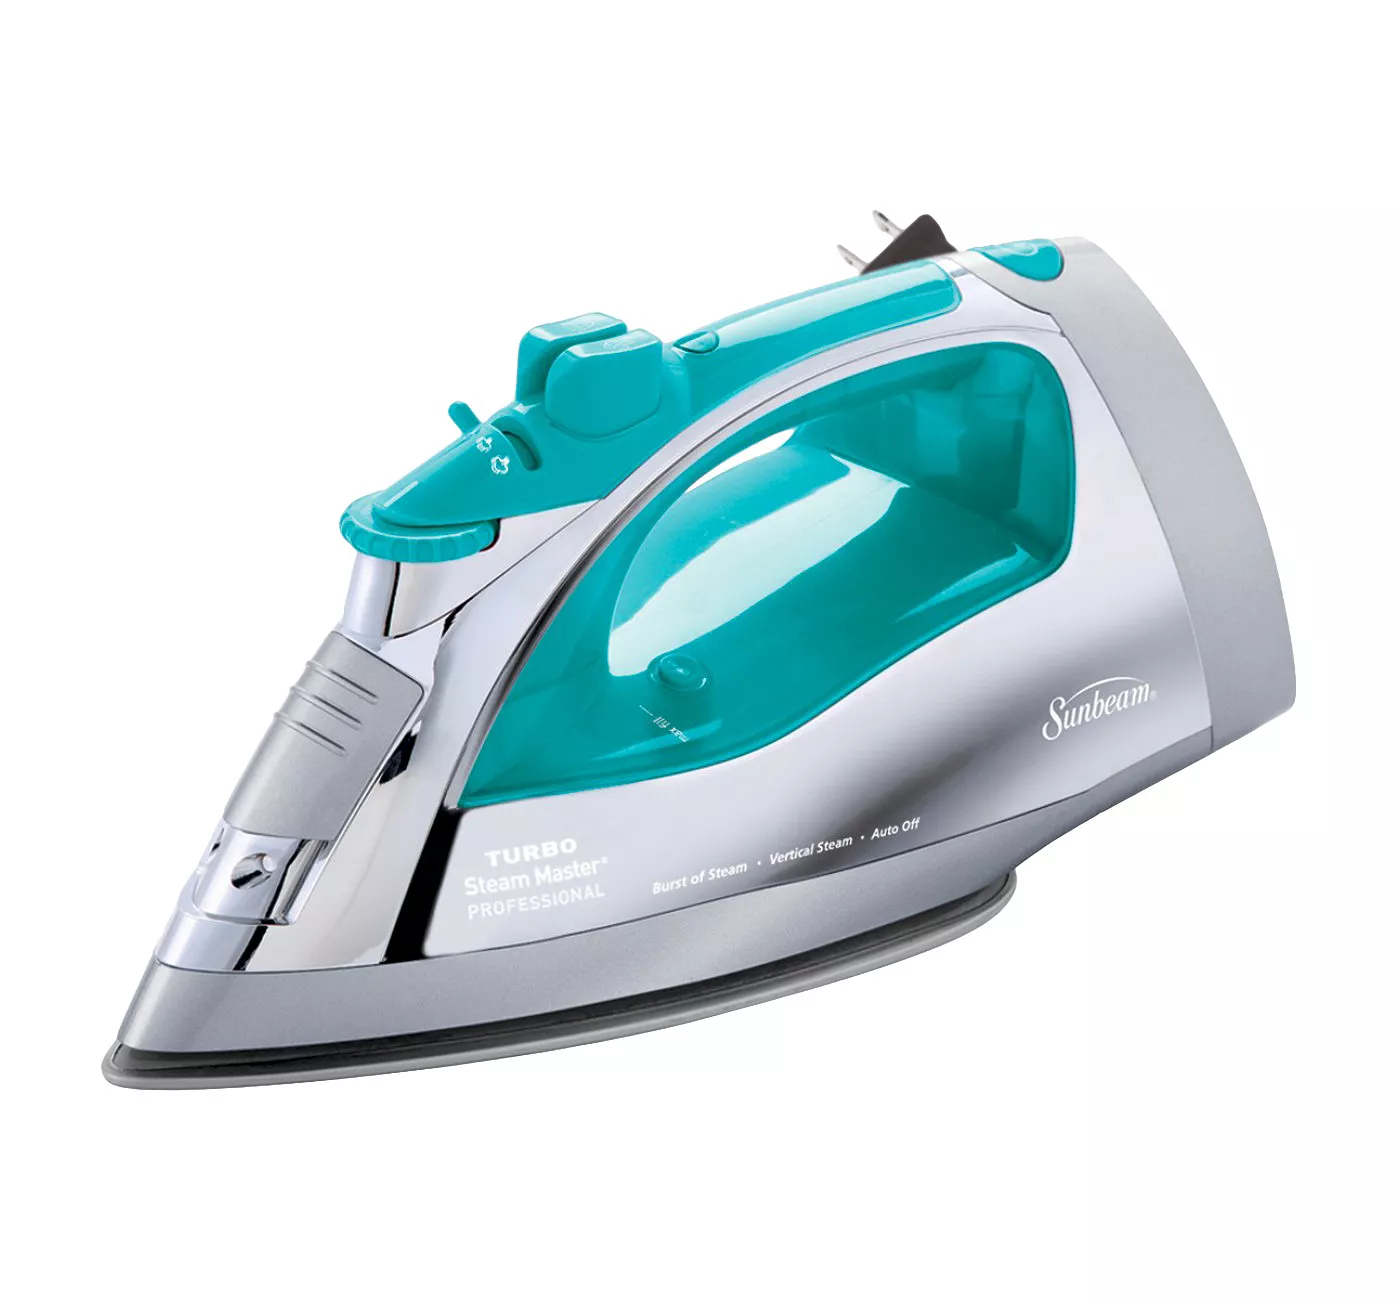 Sunbeam Steamaster Iron With Retractible Cord - Teal - image 1 of 10